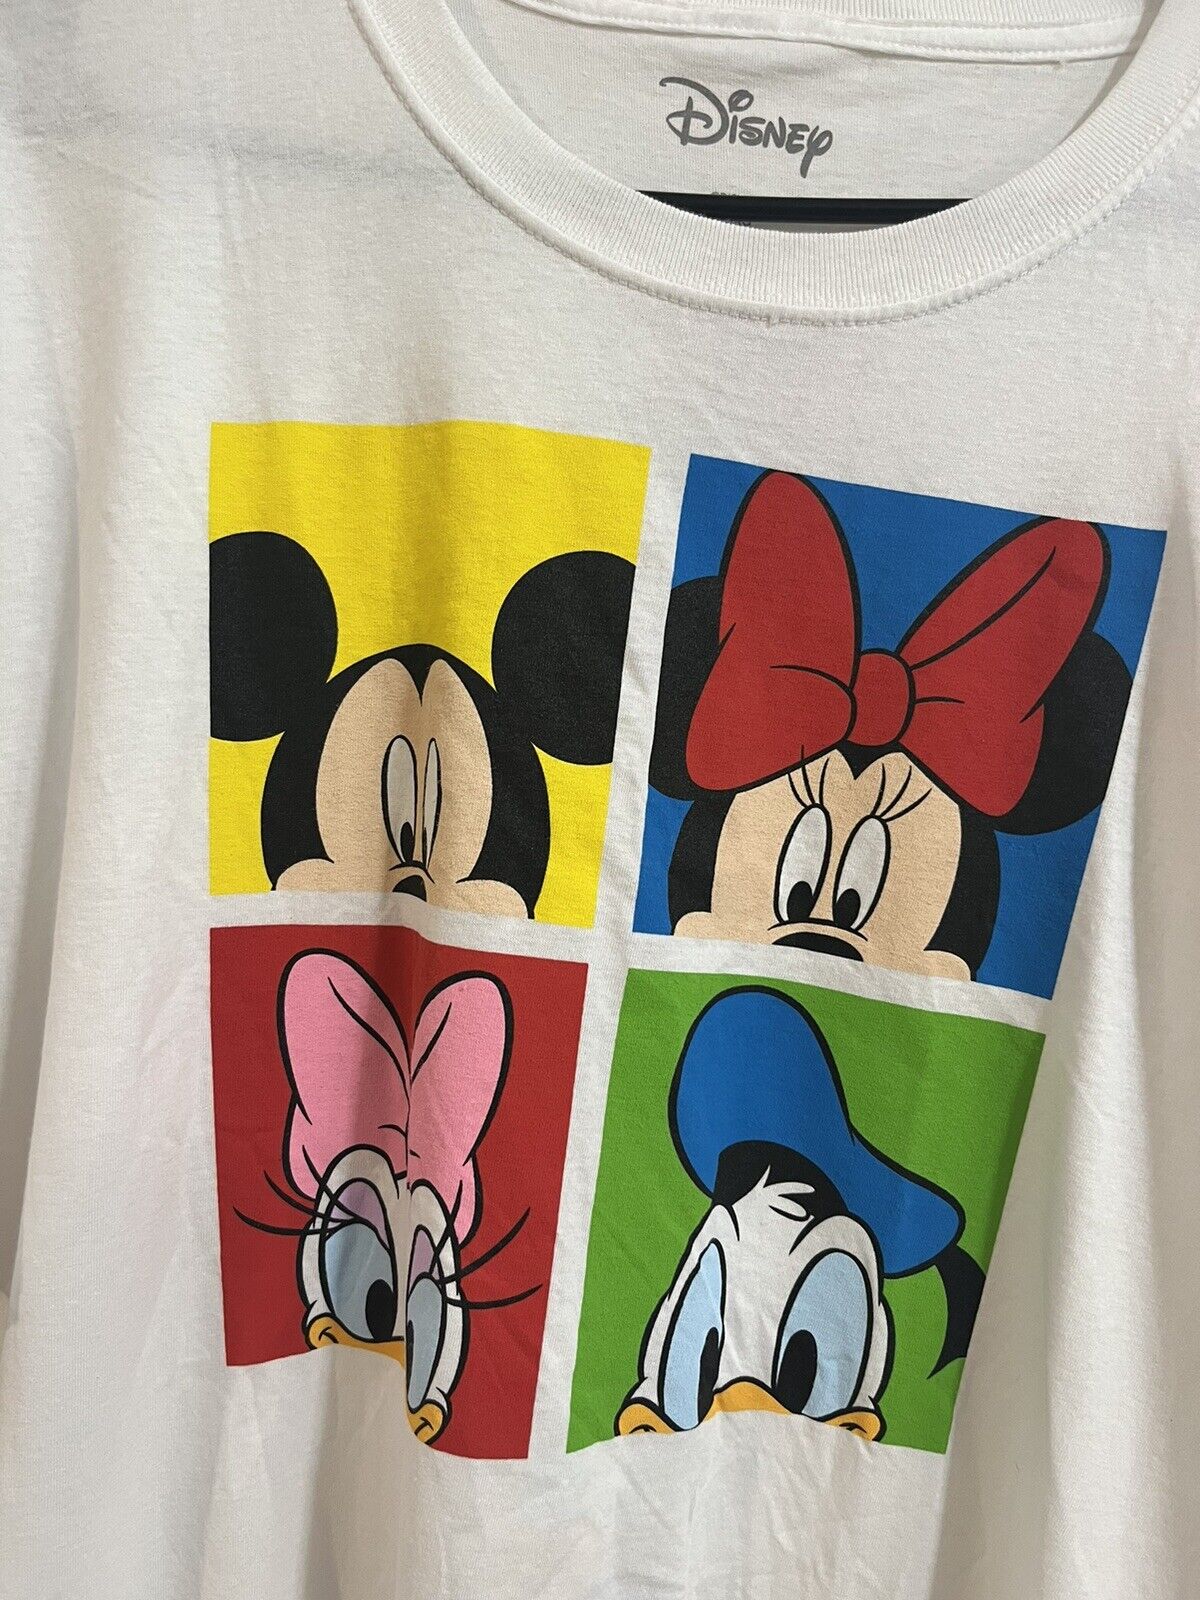 Disney Mickey Mouse Minnie Mouse Daisy and Donald Duck Shirt Size XL White 